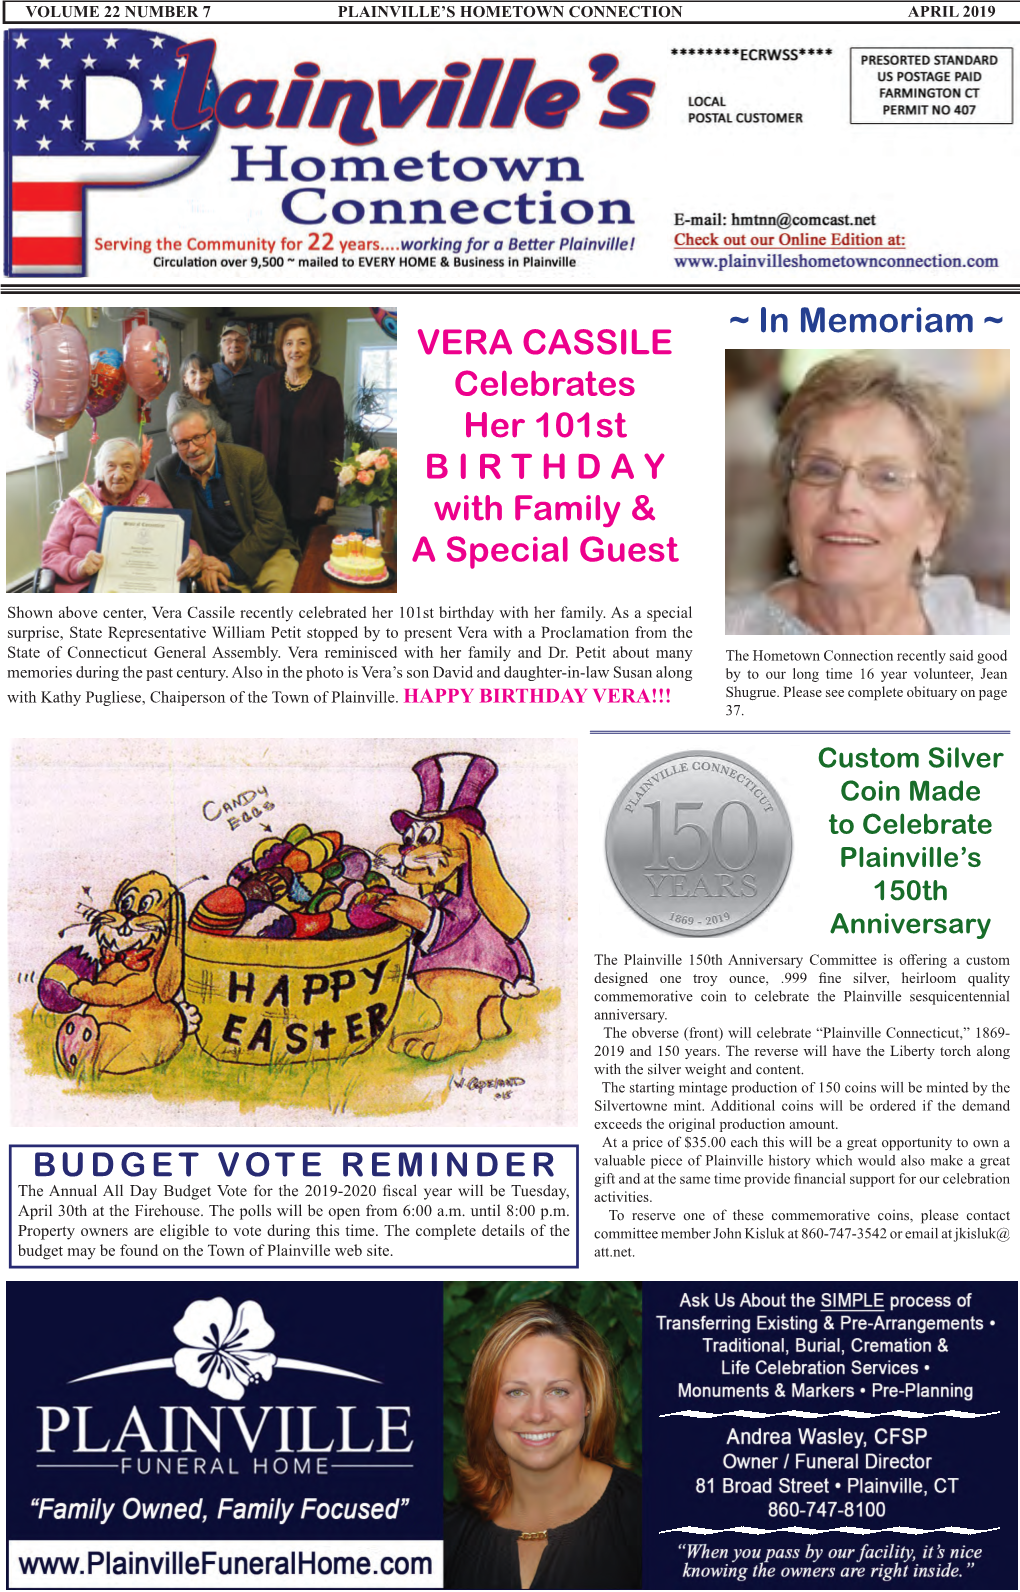 In Memoriam ~ VERA CASSILE Celebrates Her 101St BIRTHDAY with Family & a Special Guest